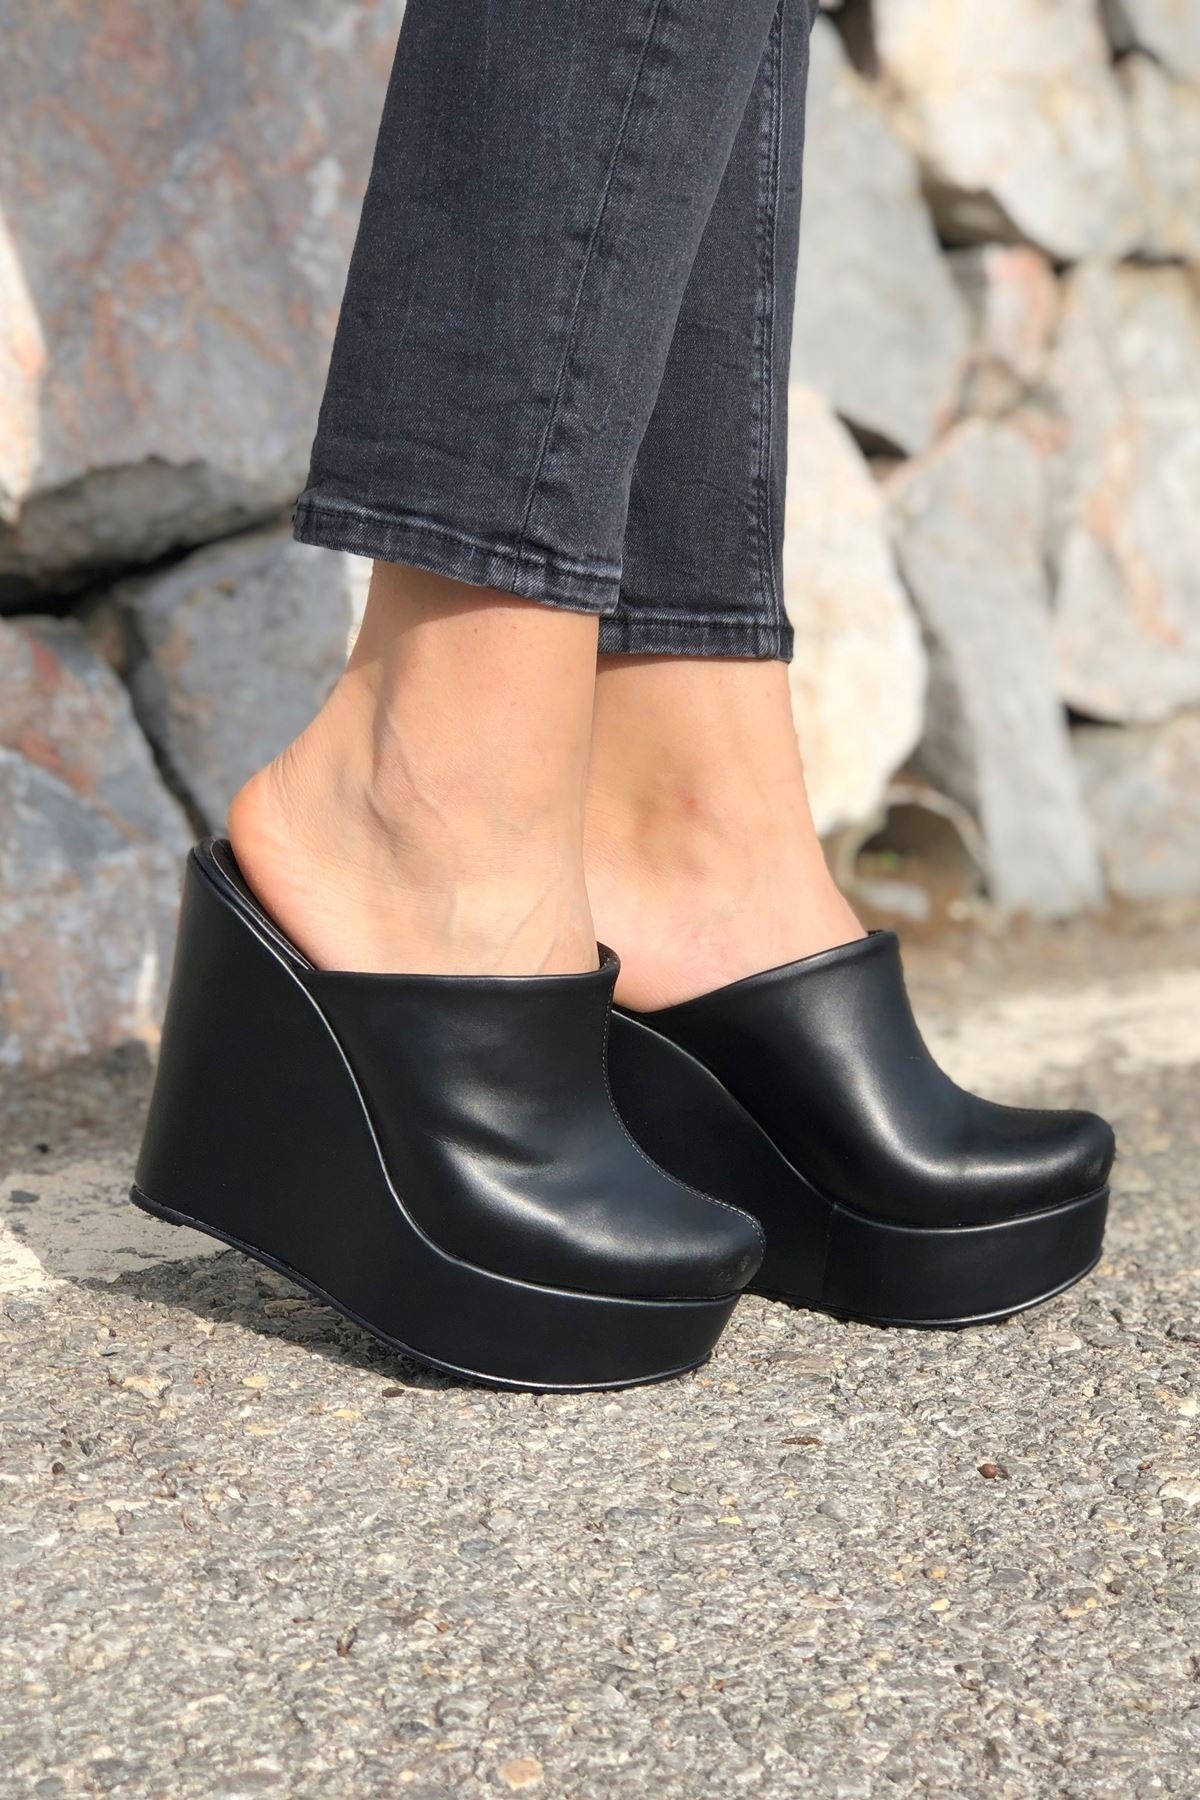 Image of Women's Black Leather Wedge Slippers